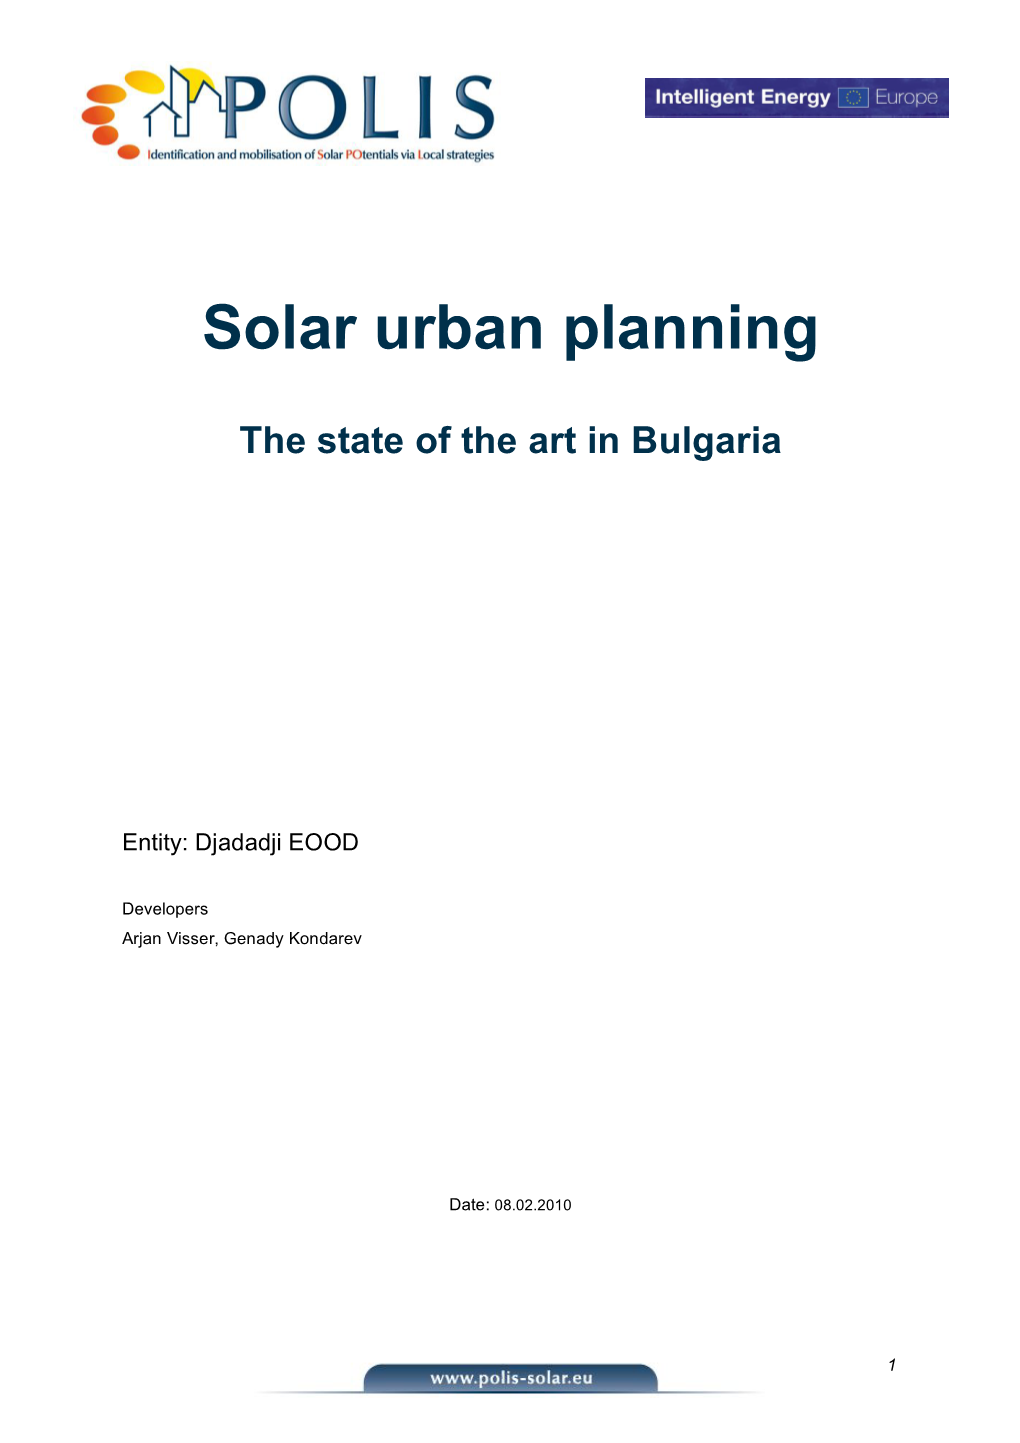 The National State of the Art for Solar Urban Planning in Bulgaria